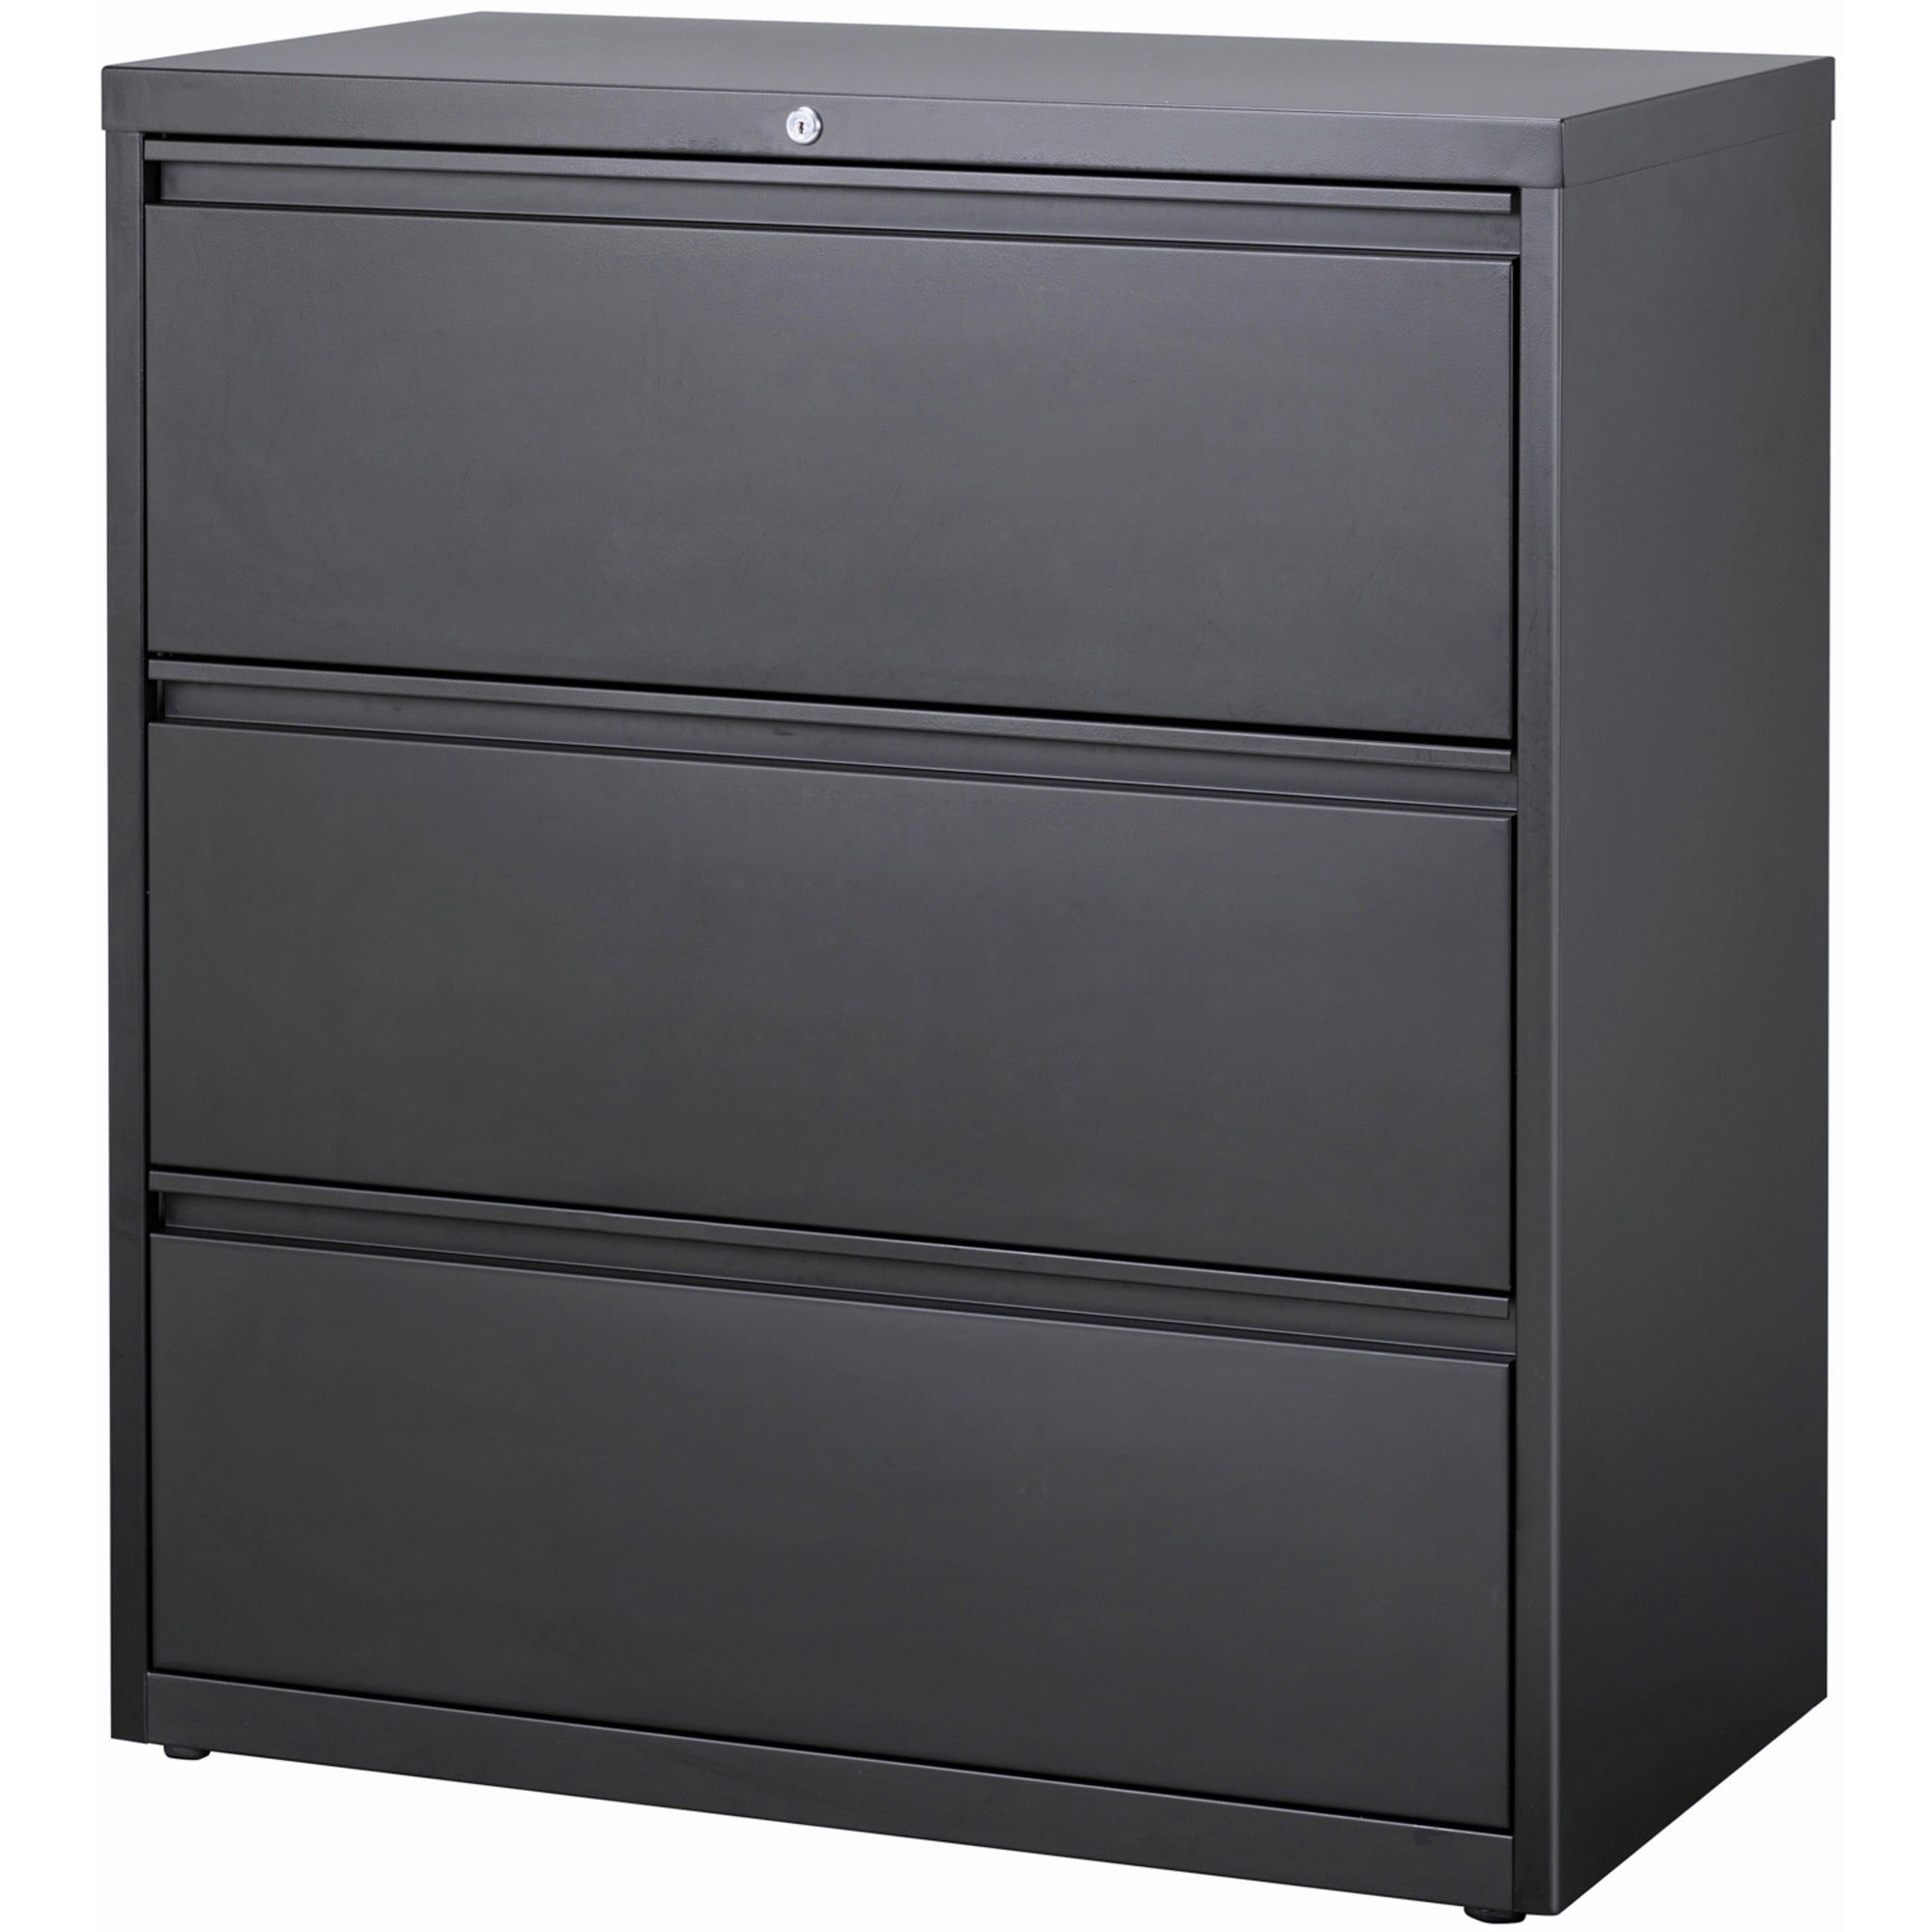 Lorell Fortress Series Lateral File - 36" x 18.8" x 40.1" - 3 x Drawer(s) for File - A4, Legal, Letter - Lateral - Anti-tip, Security Lock, Ball Bearing Slide, Reinforced Base, Leveling Glide, Interlocking, Hanging Rail, Magnetic Label Holder - Charc - 